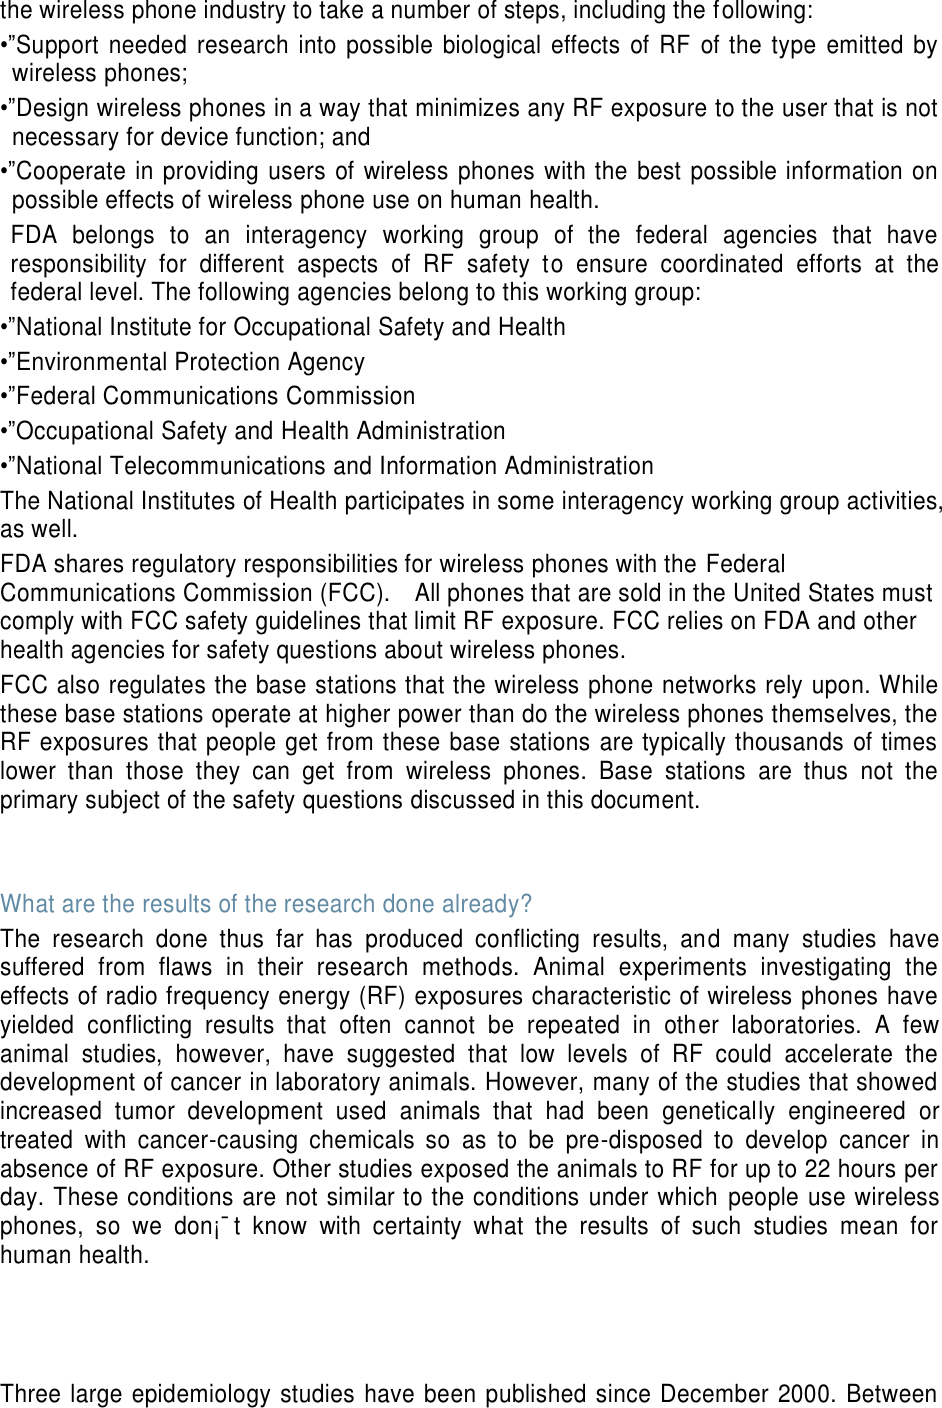 the wireless phone industry to take a number of steps, including the following: •”Support  needed  research  into  possible  biological  effects  of  RF  of  the  type  emitted  by wireless phones; •”Design wireless phones in a way that minimizes any RF exposure to the user that is not necessary for device function; and •”Cooperate in providing users of wireless  phones with the best possible information on possible effects of wireless phone use on human health. FDA  belongs  to  an  interagency  working  group  of  the  federal  agencies  that  have responsibility  for  different  aspects  of  RF  safety  to  ensure  coordinated  efforts  at  the federal level. The following agencies belong to this working group: •”National Institute for Occupational Safety and Health •”Environmental Protection Agency •”Federal Communications Commission •”Occupational Safety and Health Administration •”National Telecommunications and Information Administration The National Institutes of Health participates in some interagency working group activities, as well. FDA shares regulatory responsibilities for wireless phones with the Federal Communications Commission (FCC).    All phones that are sold in the United States must comply with FCC safety guidelines that limit RF exposure. FCC relies on FDA and other health agencies for safety questions about wireless phones. FCC also regulates the base stations that the wireless phone networks rely upon. While these base stations operate at higher power than do the wireless phones themselves, the RF exposures that people get from these base stations are typically thousands of times lower  than  those  they  can  get  from  wireless  phones.  Base  stations  are  thus  not  the primary subject of the safety questions discussed in this document.   What are the results of the research done already? The  research  done  thus  far  has  produced  conflicting  results,  and  many  studies  have suffered  from  flaws  in  their  research  methods.  Animal  experiments  investigating  the effects of radio frequency energy (RF) exposures characteristic of wireless phones have yielded  conflicting  results  that  often  cannot  be  repeated  in  other  laboratories.  A  few animal  studies,  however,  have  suggested  that  low  levels  of  RF  could  accelerate  the development of cancer in laboratory animals. However, many of the studies that showed increased  tumor  development  used  animals  that  had  been  genetically  engineered  or treated  with  cancer-causing  chemicals  so  as  to  be  pre-disposed  to  develop  cancer  in absence of RF exposure. Other studies exposed the animals to RF for up to 22 hours per day. These conditions are not similar to the conditions under which  people use wireless phones,  so  we  don¡¯t  know  with  certainty  what  the  results  of  such  studies  mean  for human health.    Three large epidemiology studies have been published since December 2000. Between 